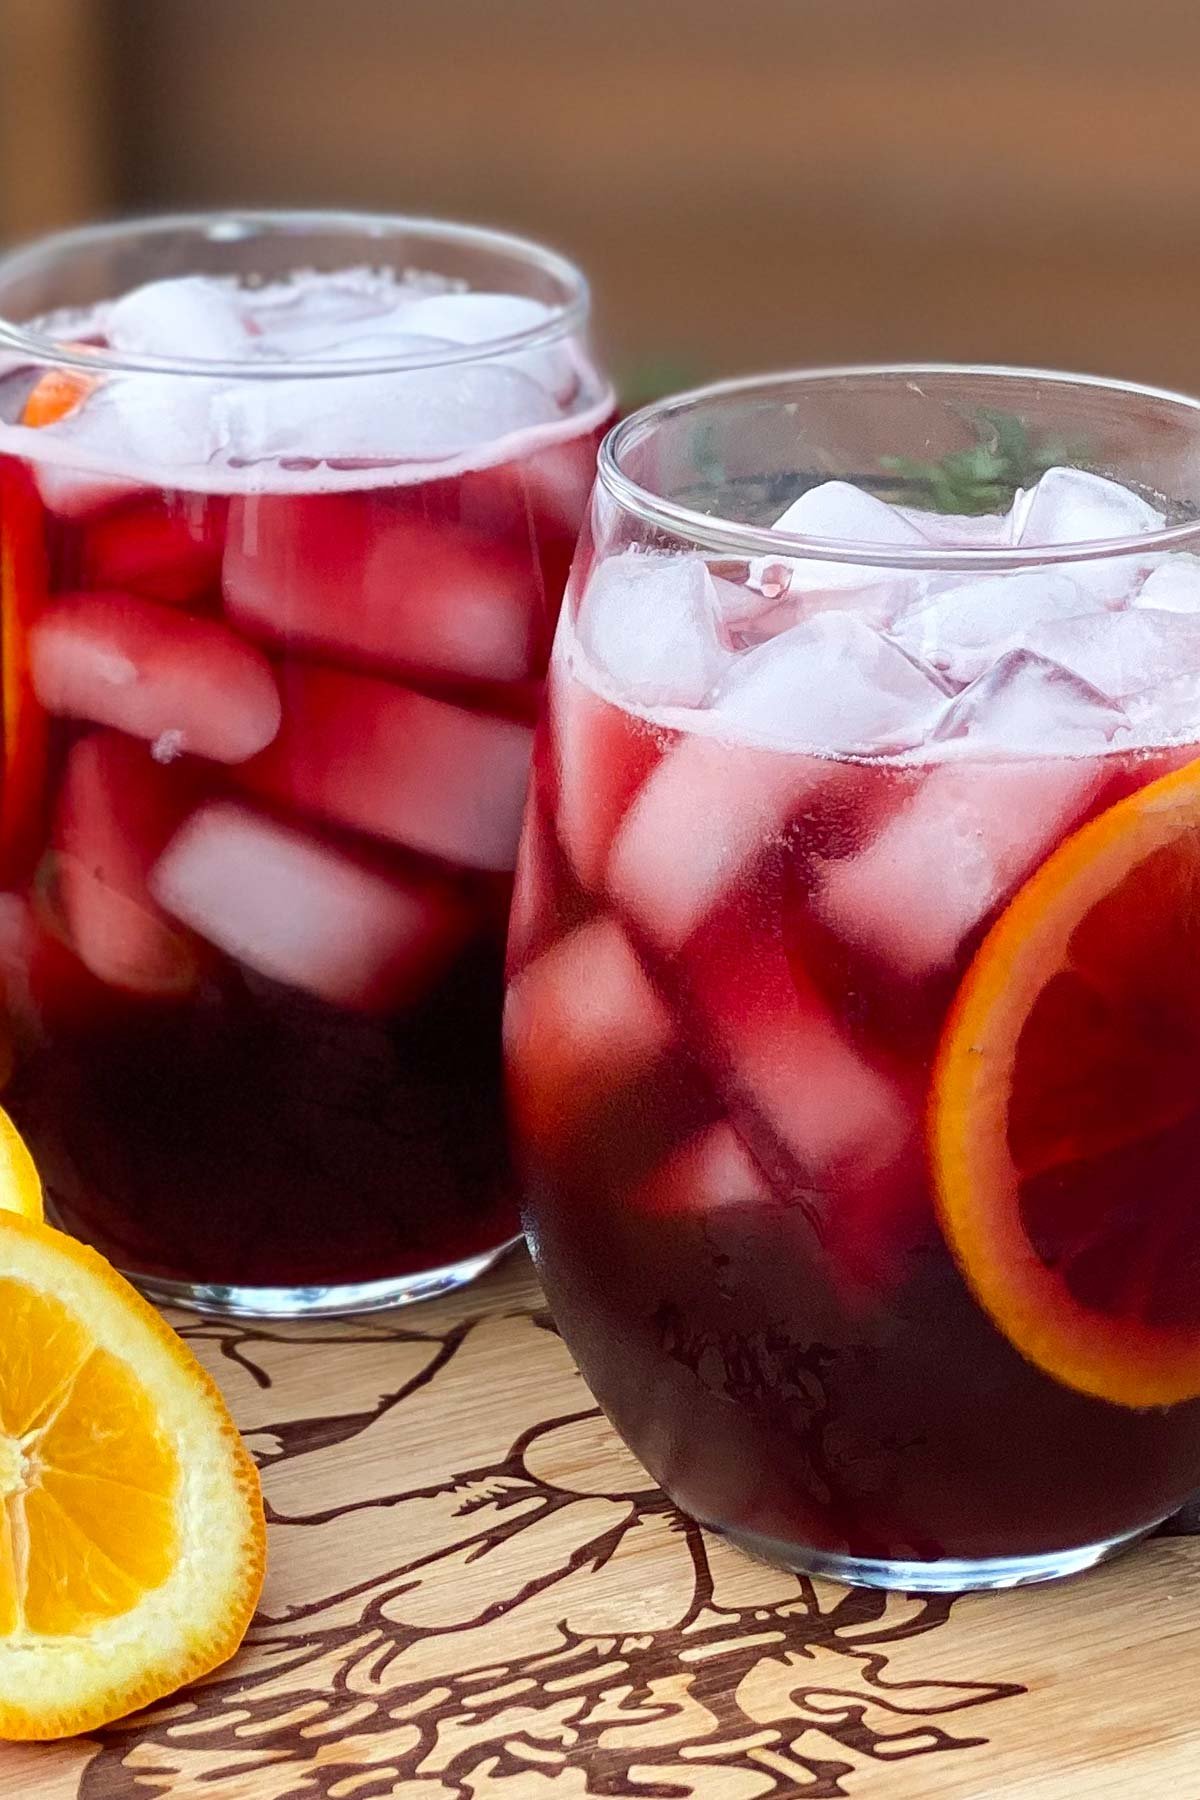 Glasses of red wine with orange slice and ice cubes.